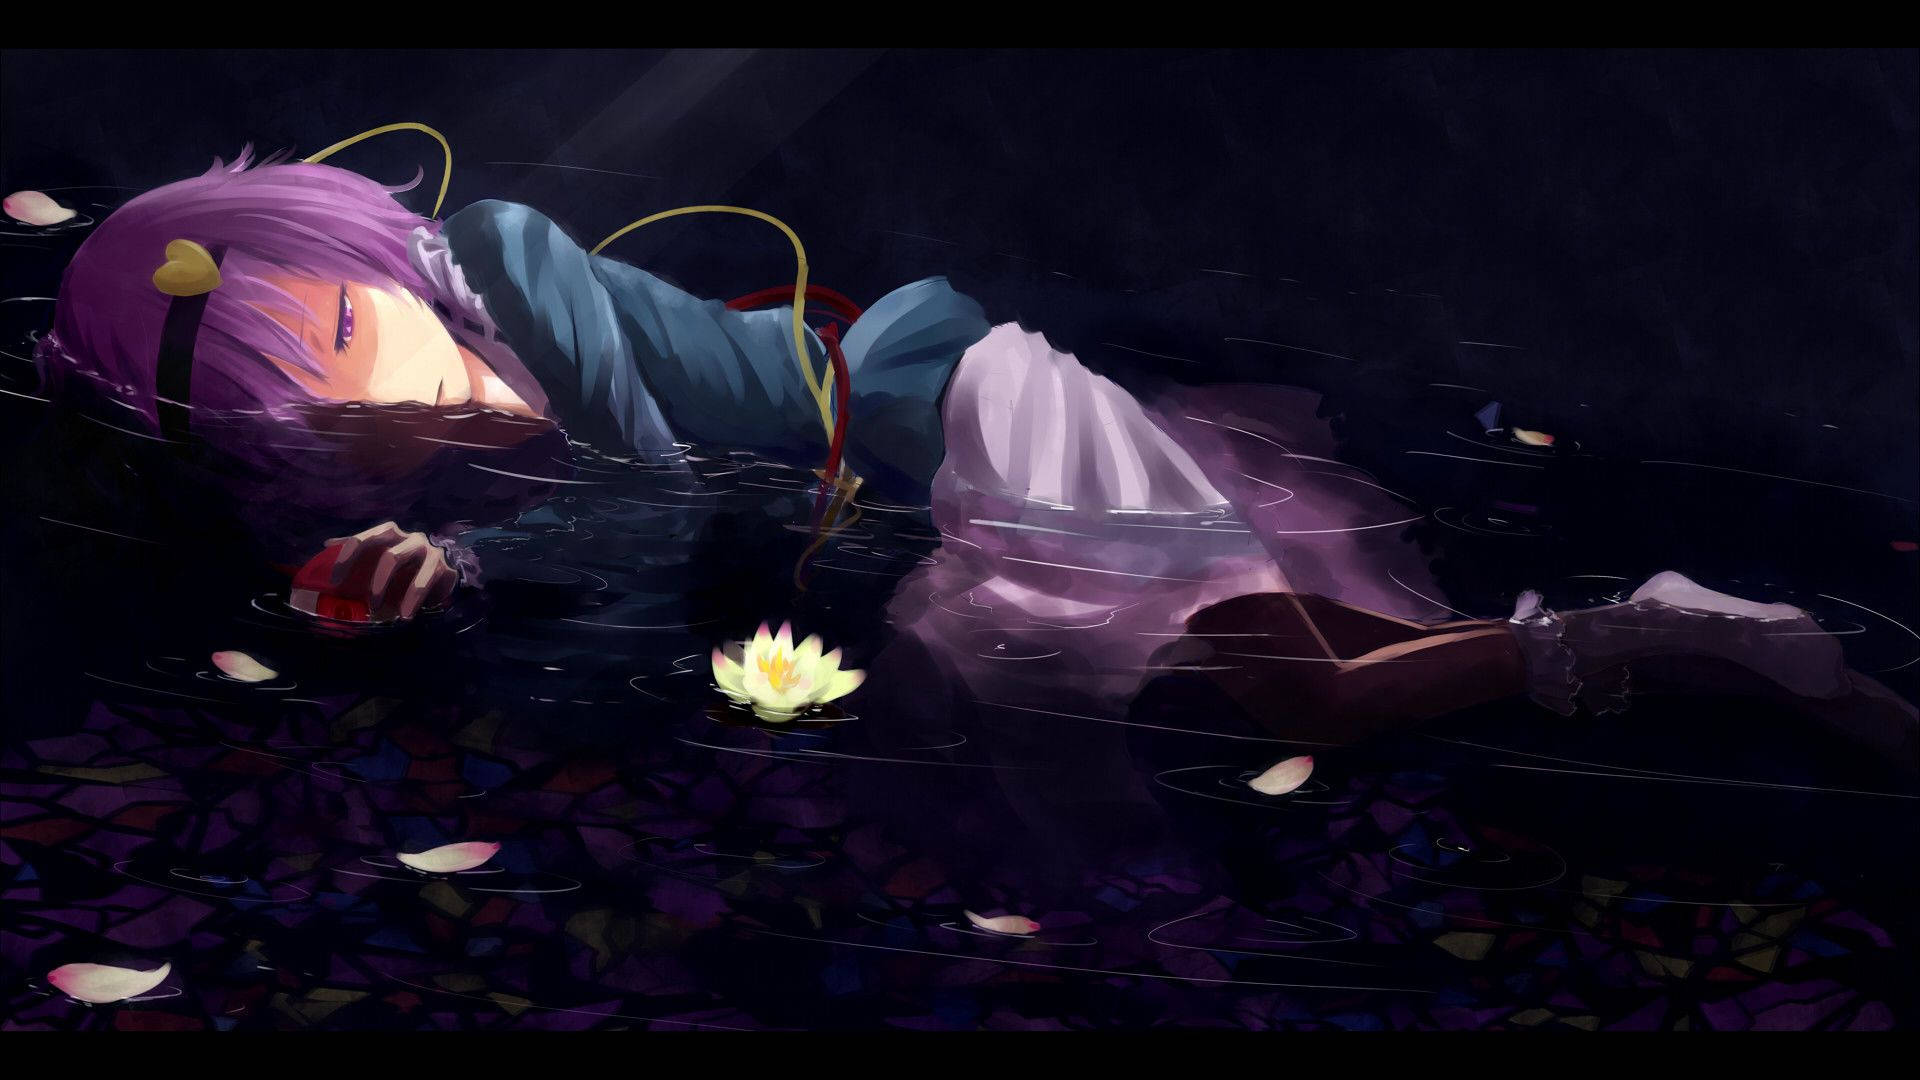 Anime Girl Sad Alone On Water With Flowers Wallpaper